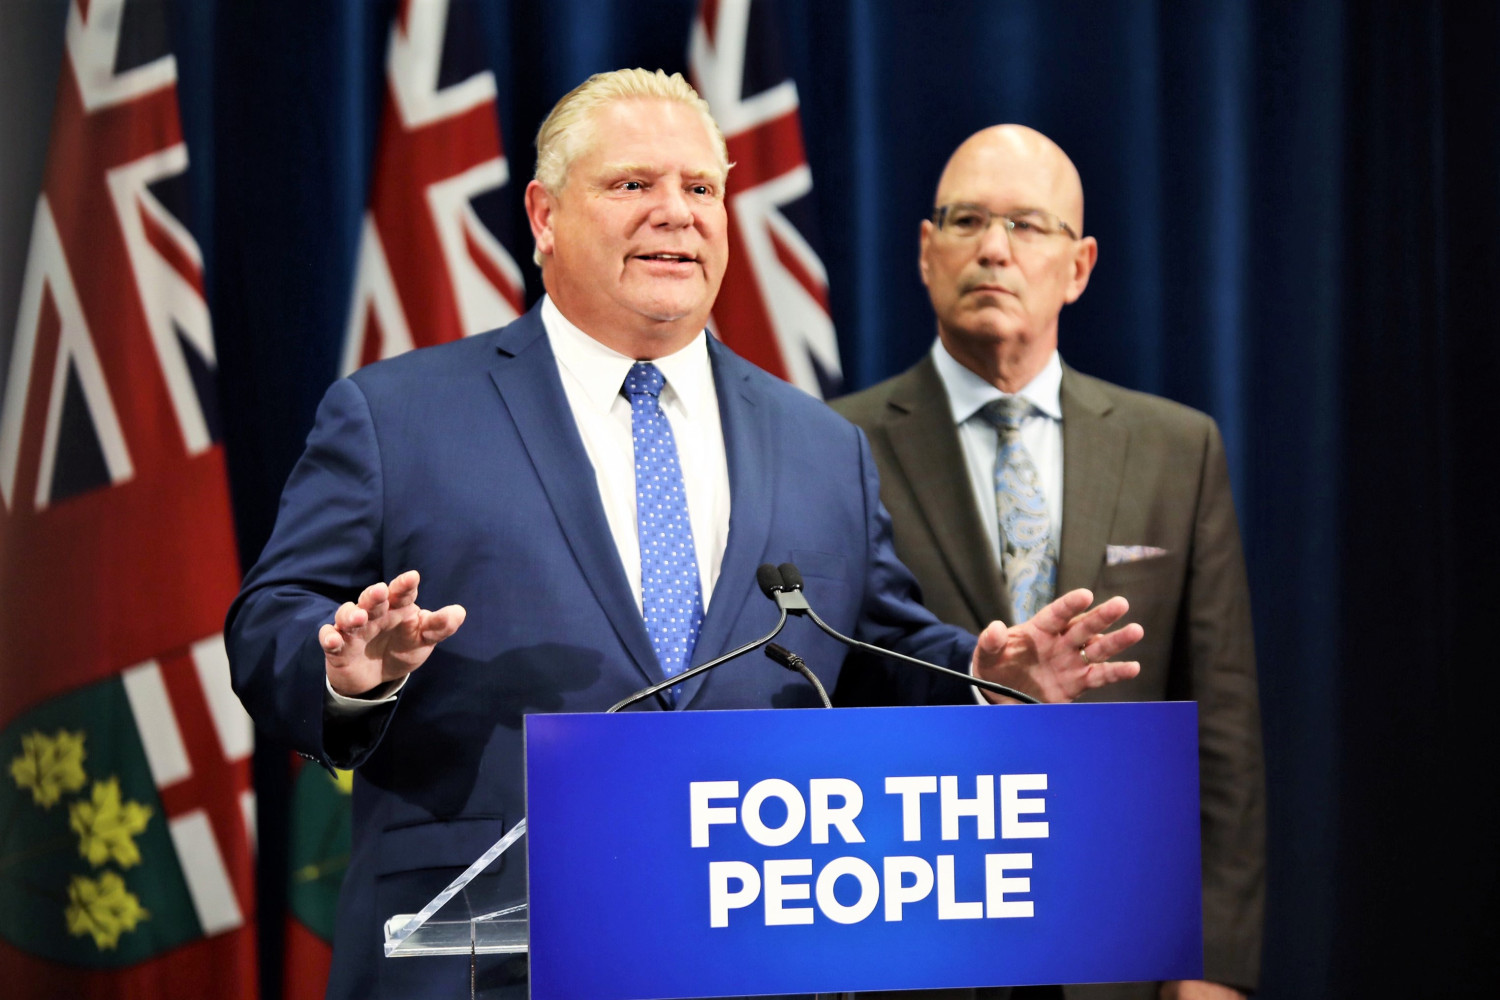 Reorganizing Peel is just another Doug Ford power grab